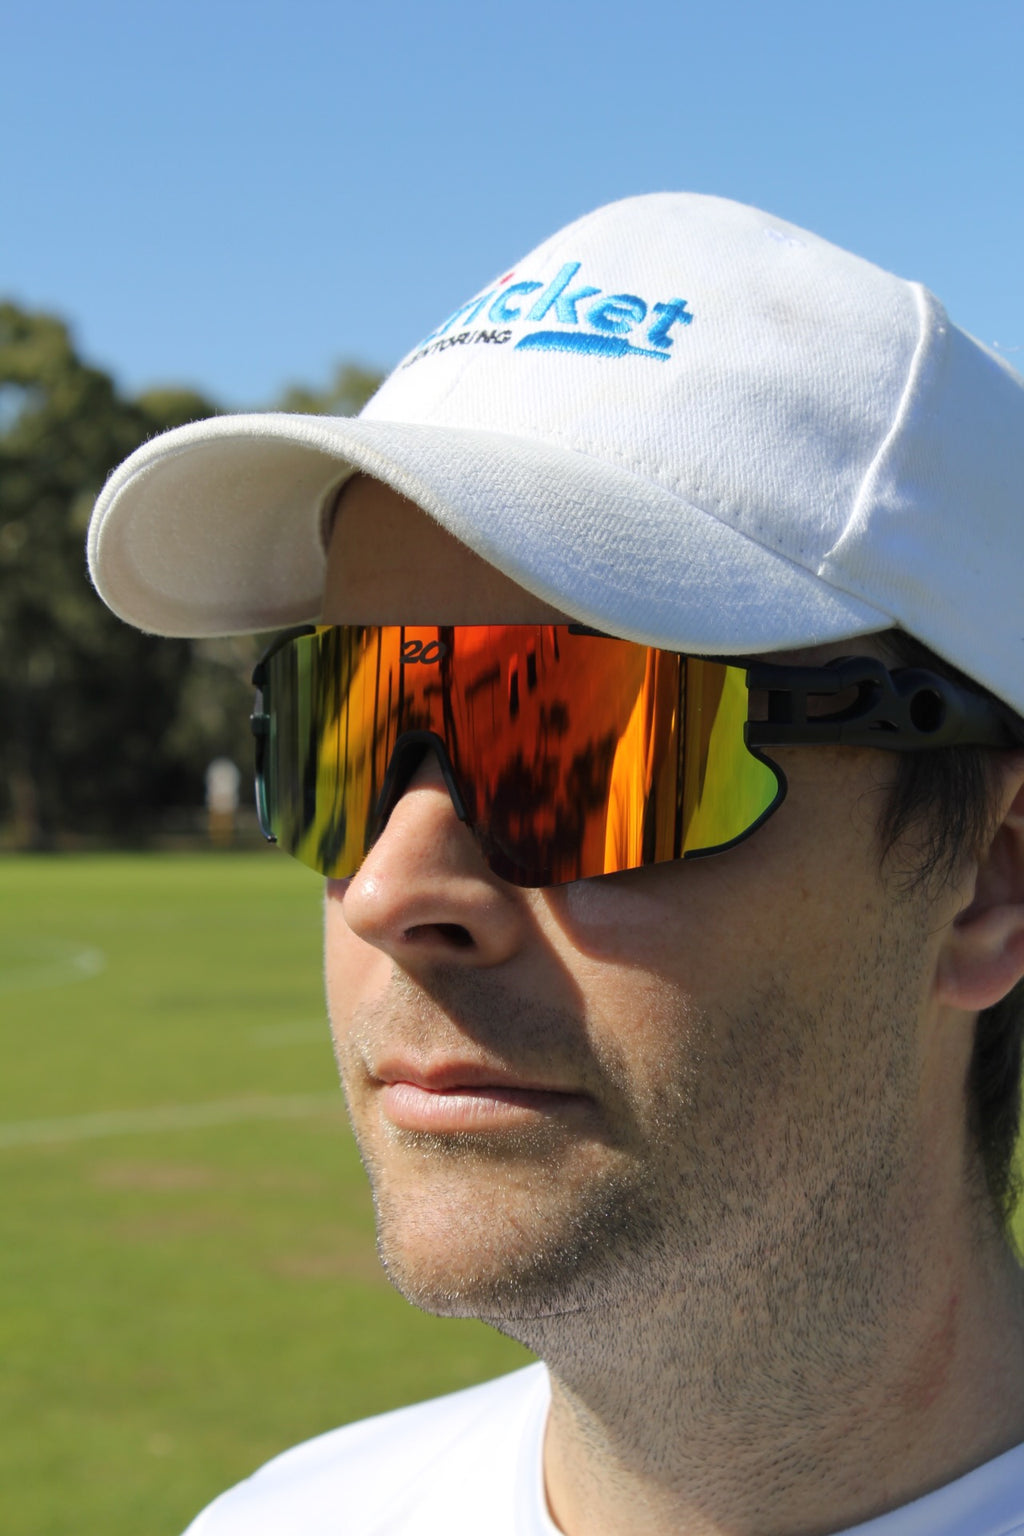 T20 CLASSIC ALL ROUNDER SUNGLASSES